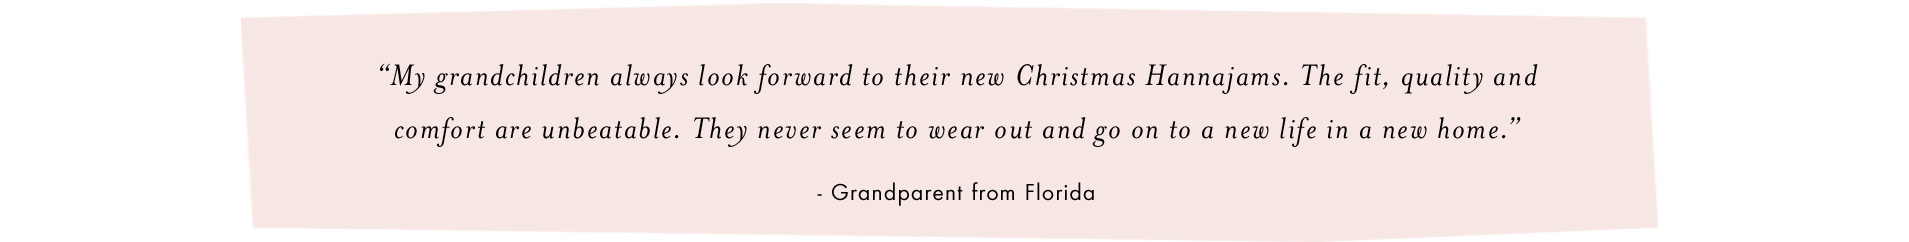 My grandchildren always look forward to their new Christmas Hannajams. The fit, quality and comfort are unbeatable. They never seem to wear out and go on to a new life in a new home -Grandparent from Florida